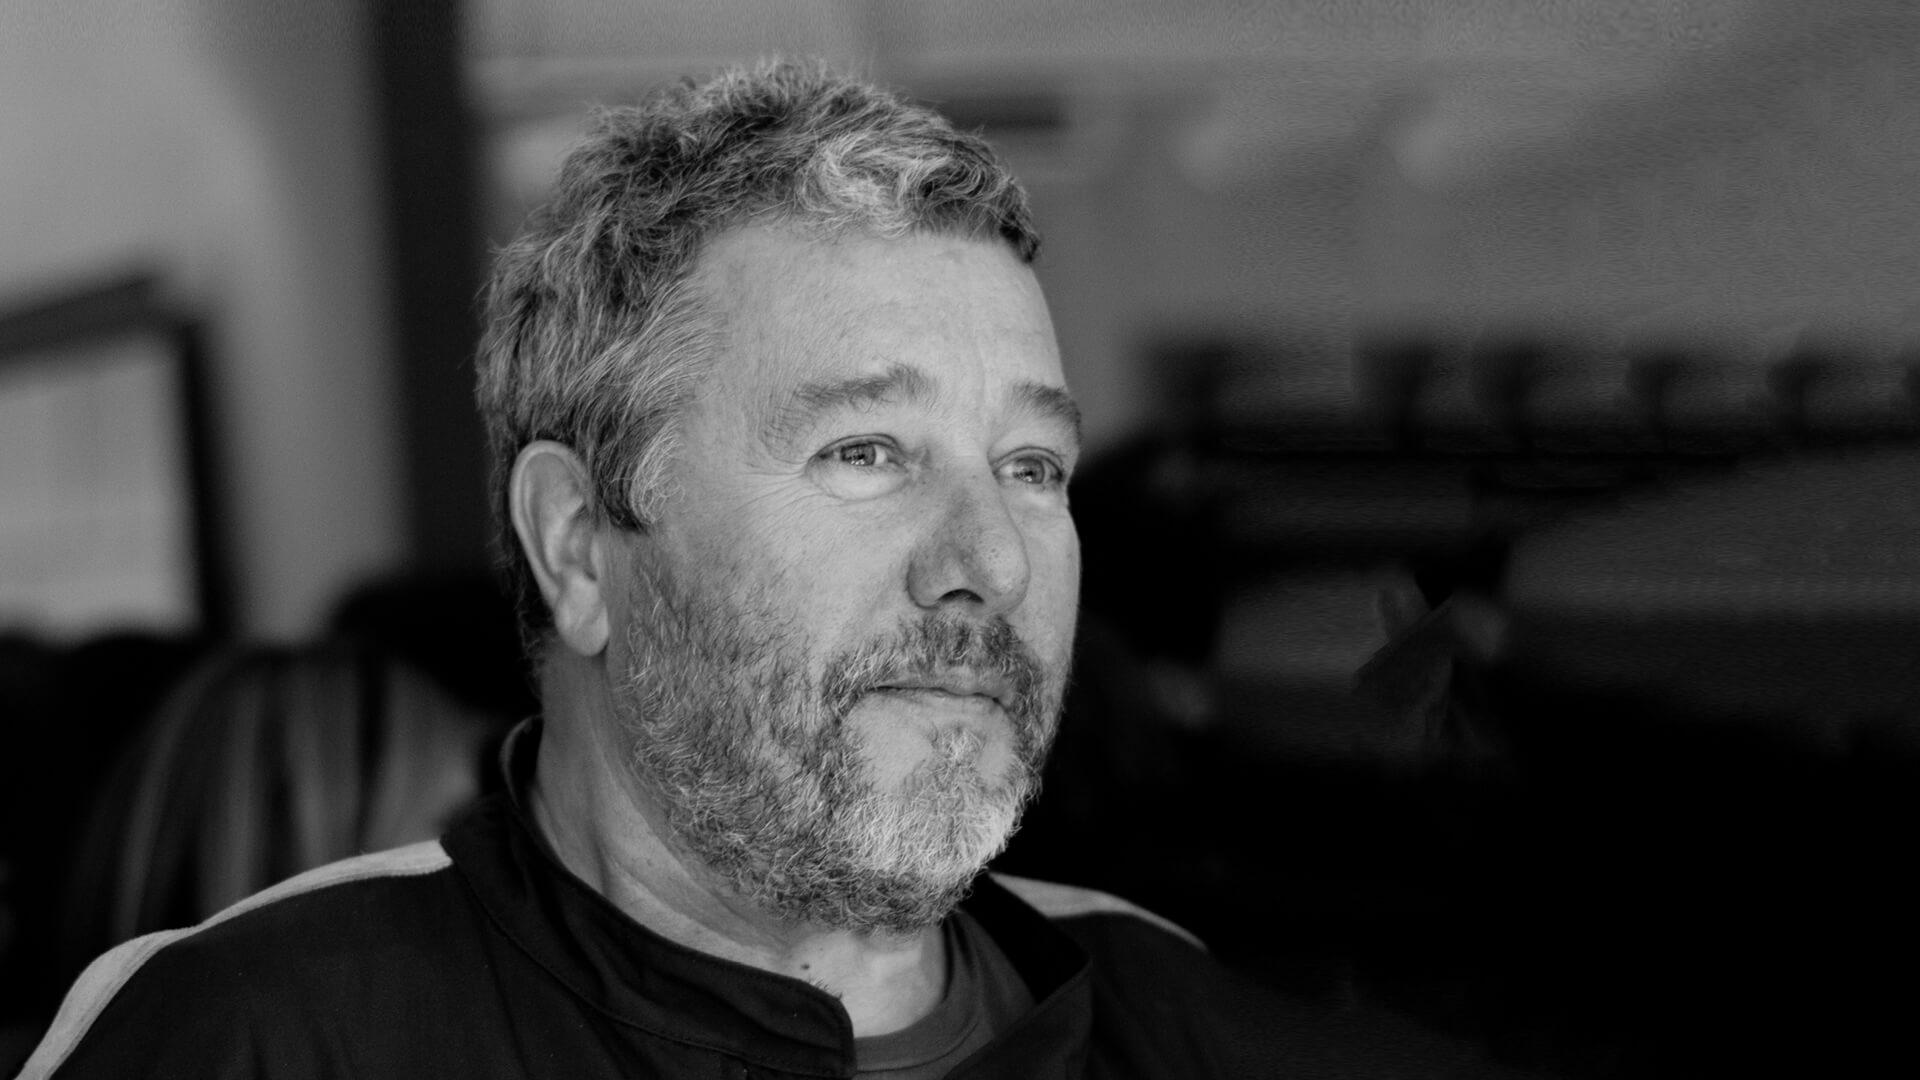 Philippe Starck, the leader of democratic design, continues to push boundaries at 71